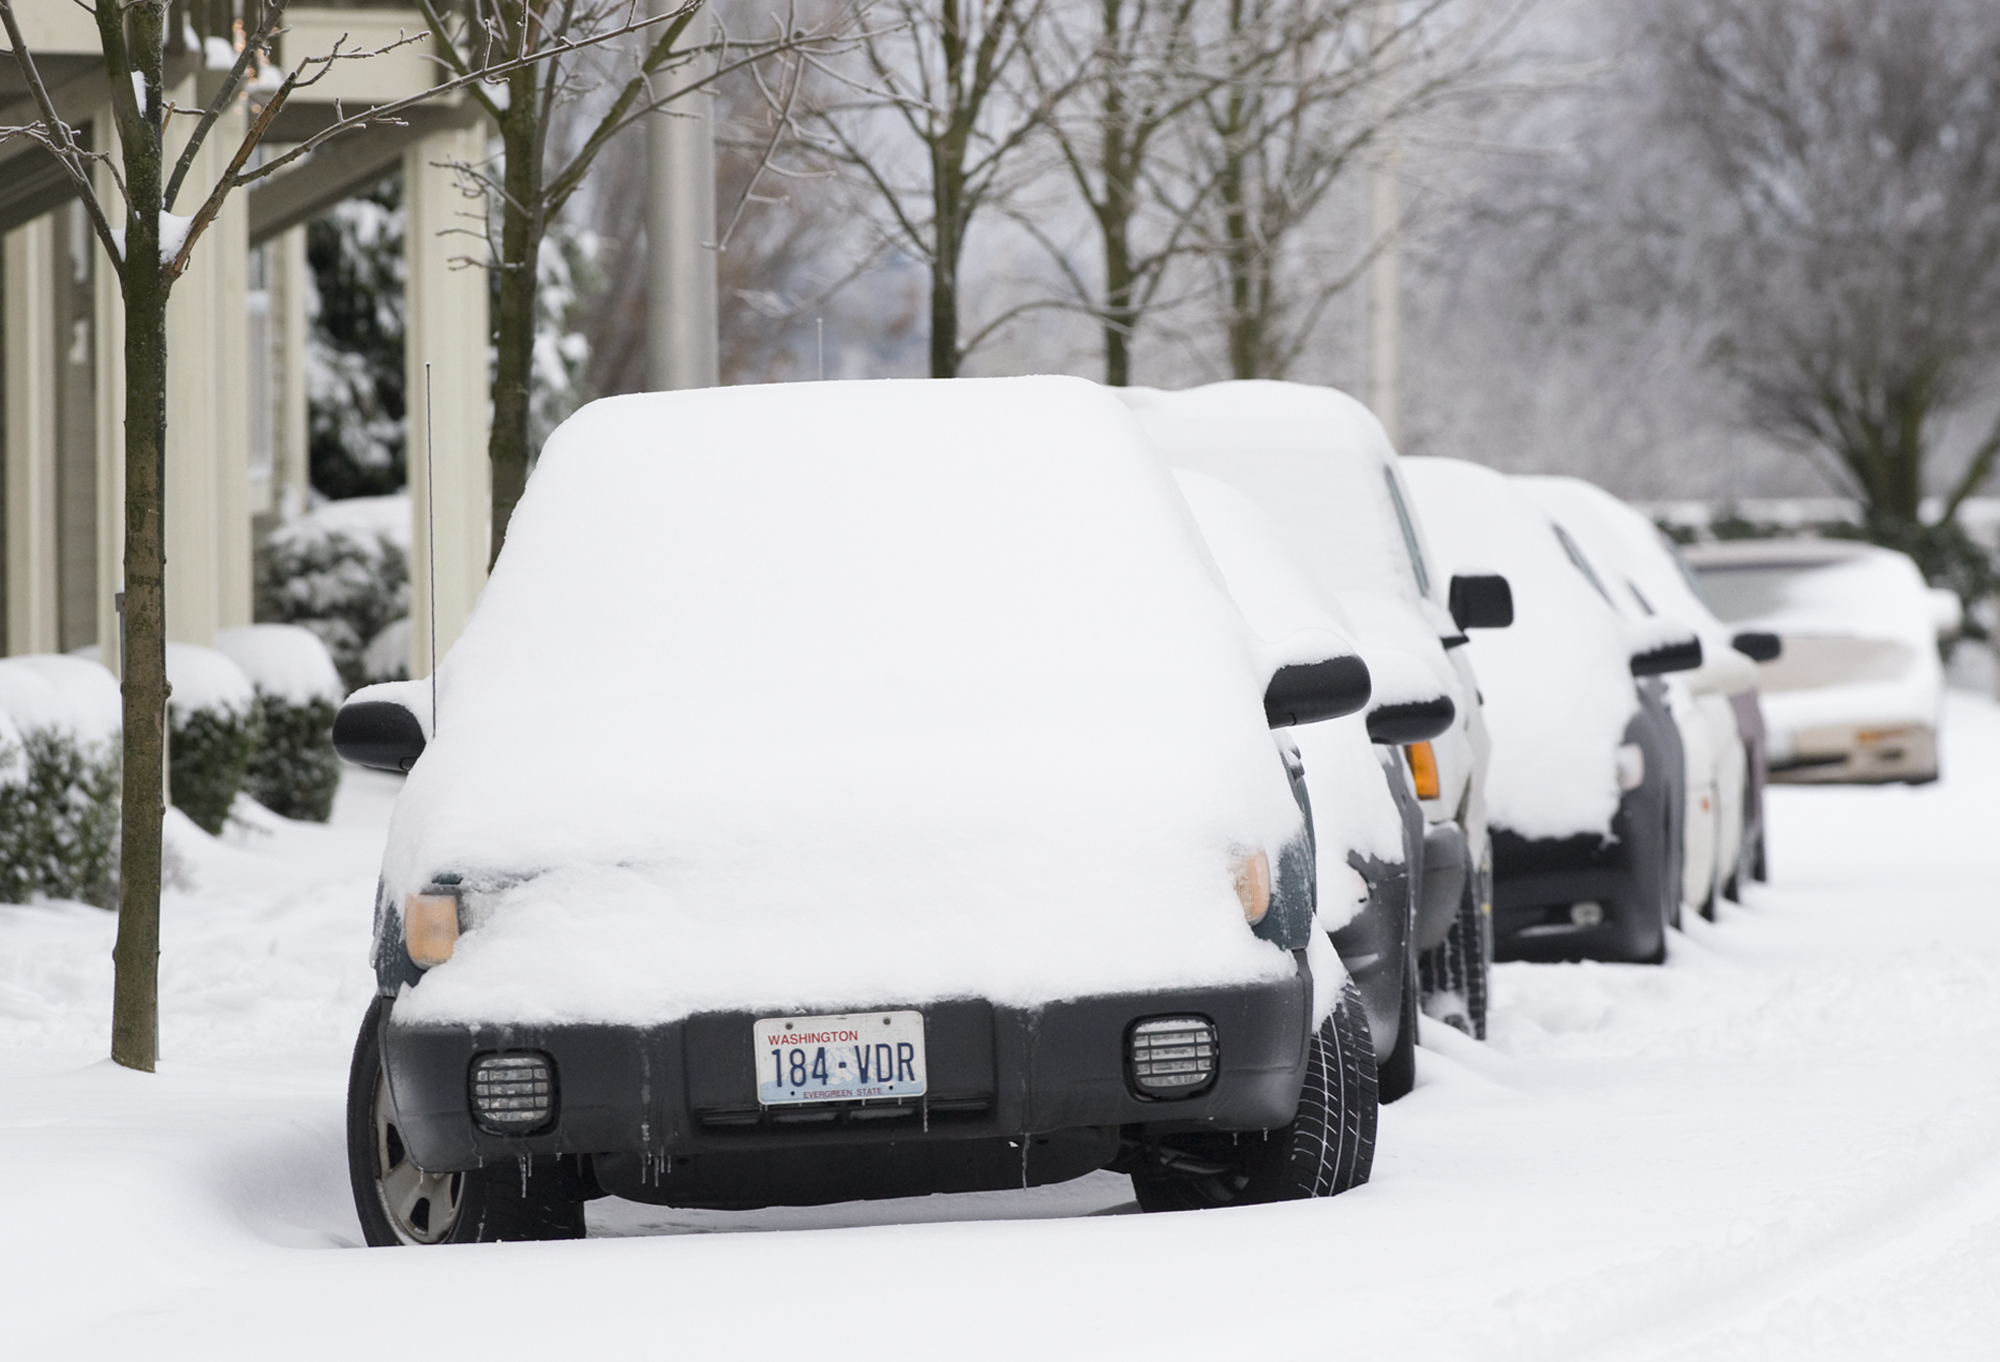 Snow and ice covered cars on Columbia River Drive in Vancouver on Dec. 21, 2008.